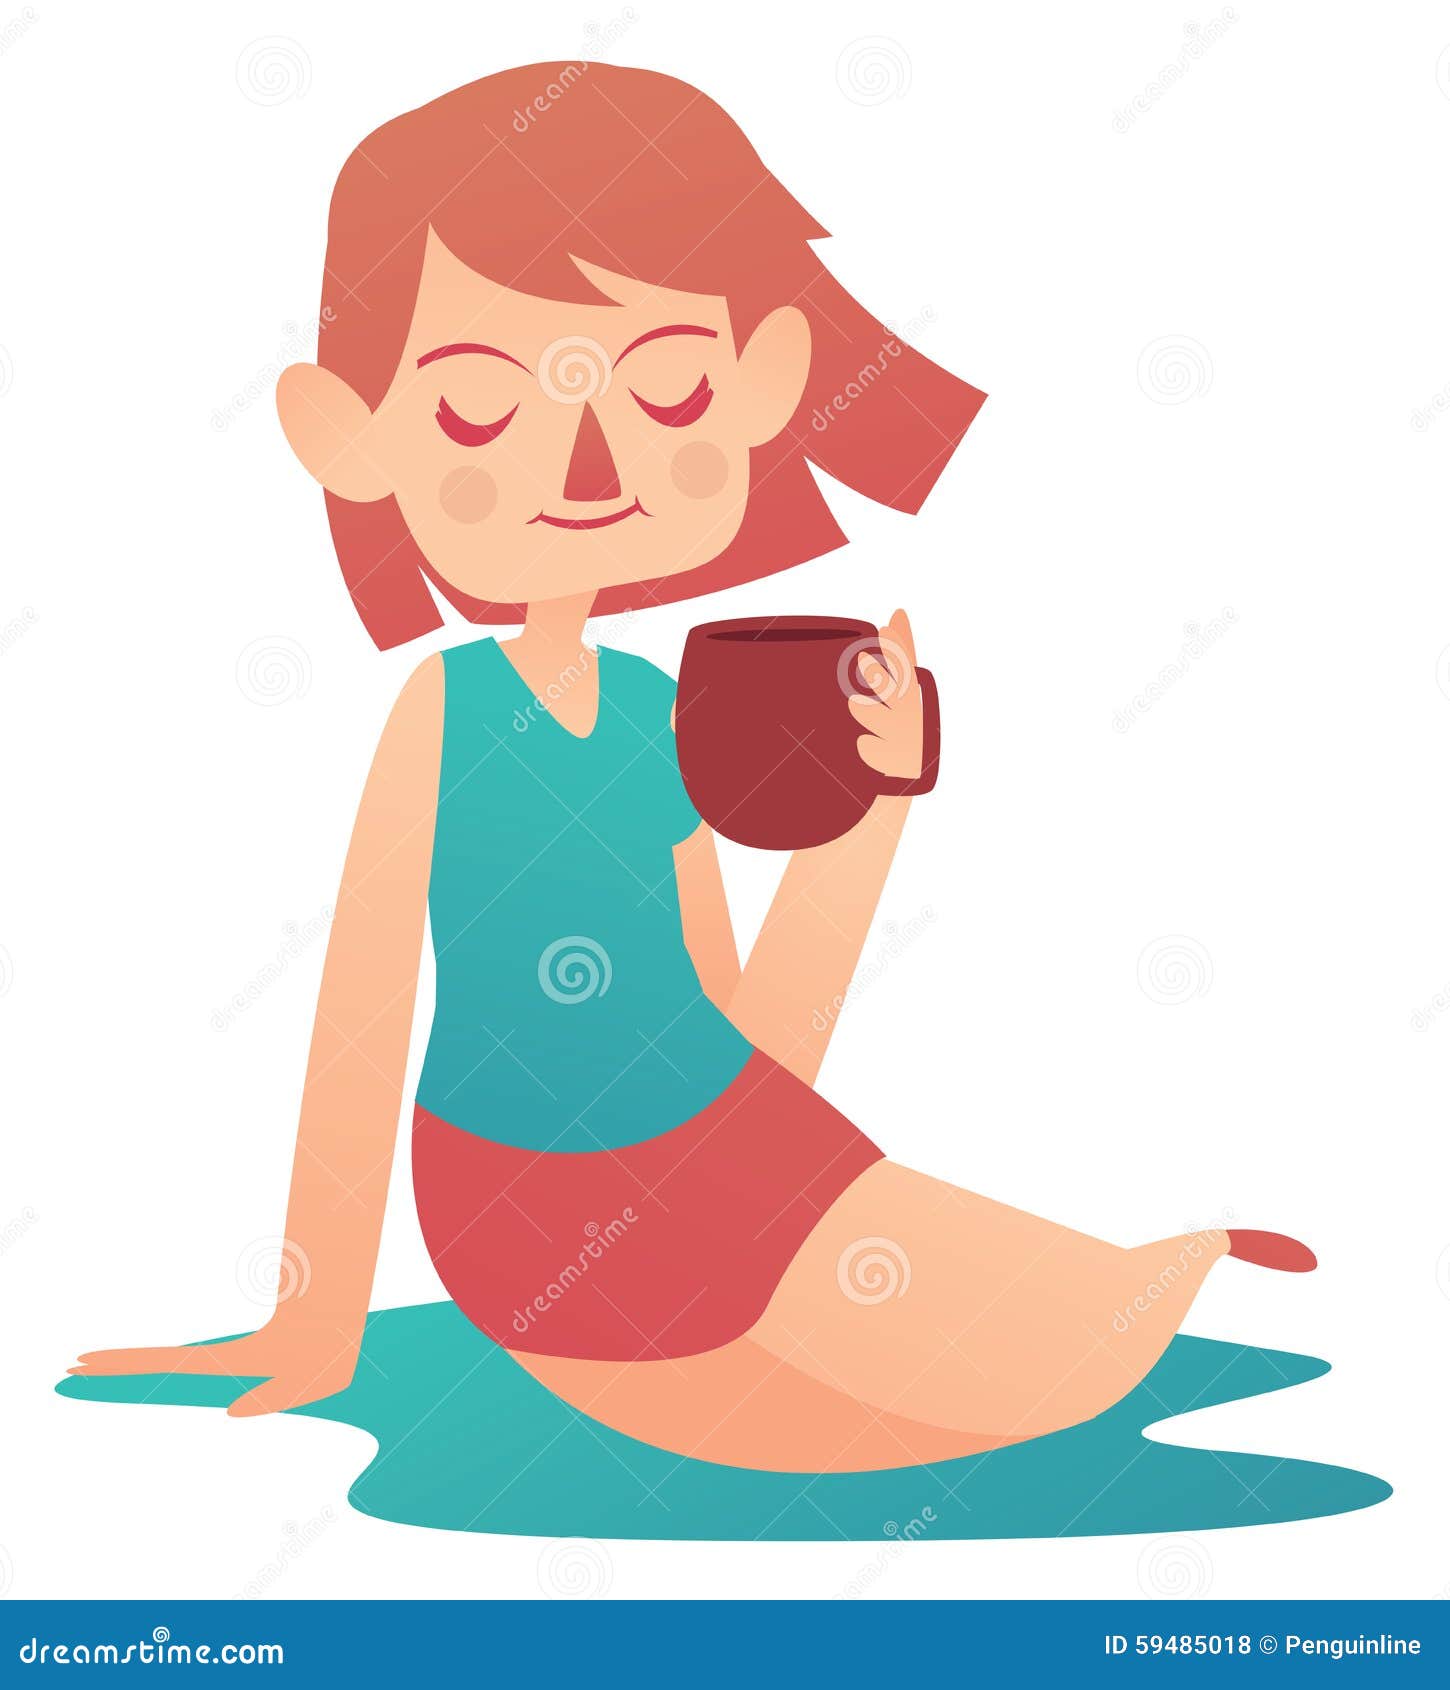 girl relaxing clipart - photo #32